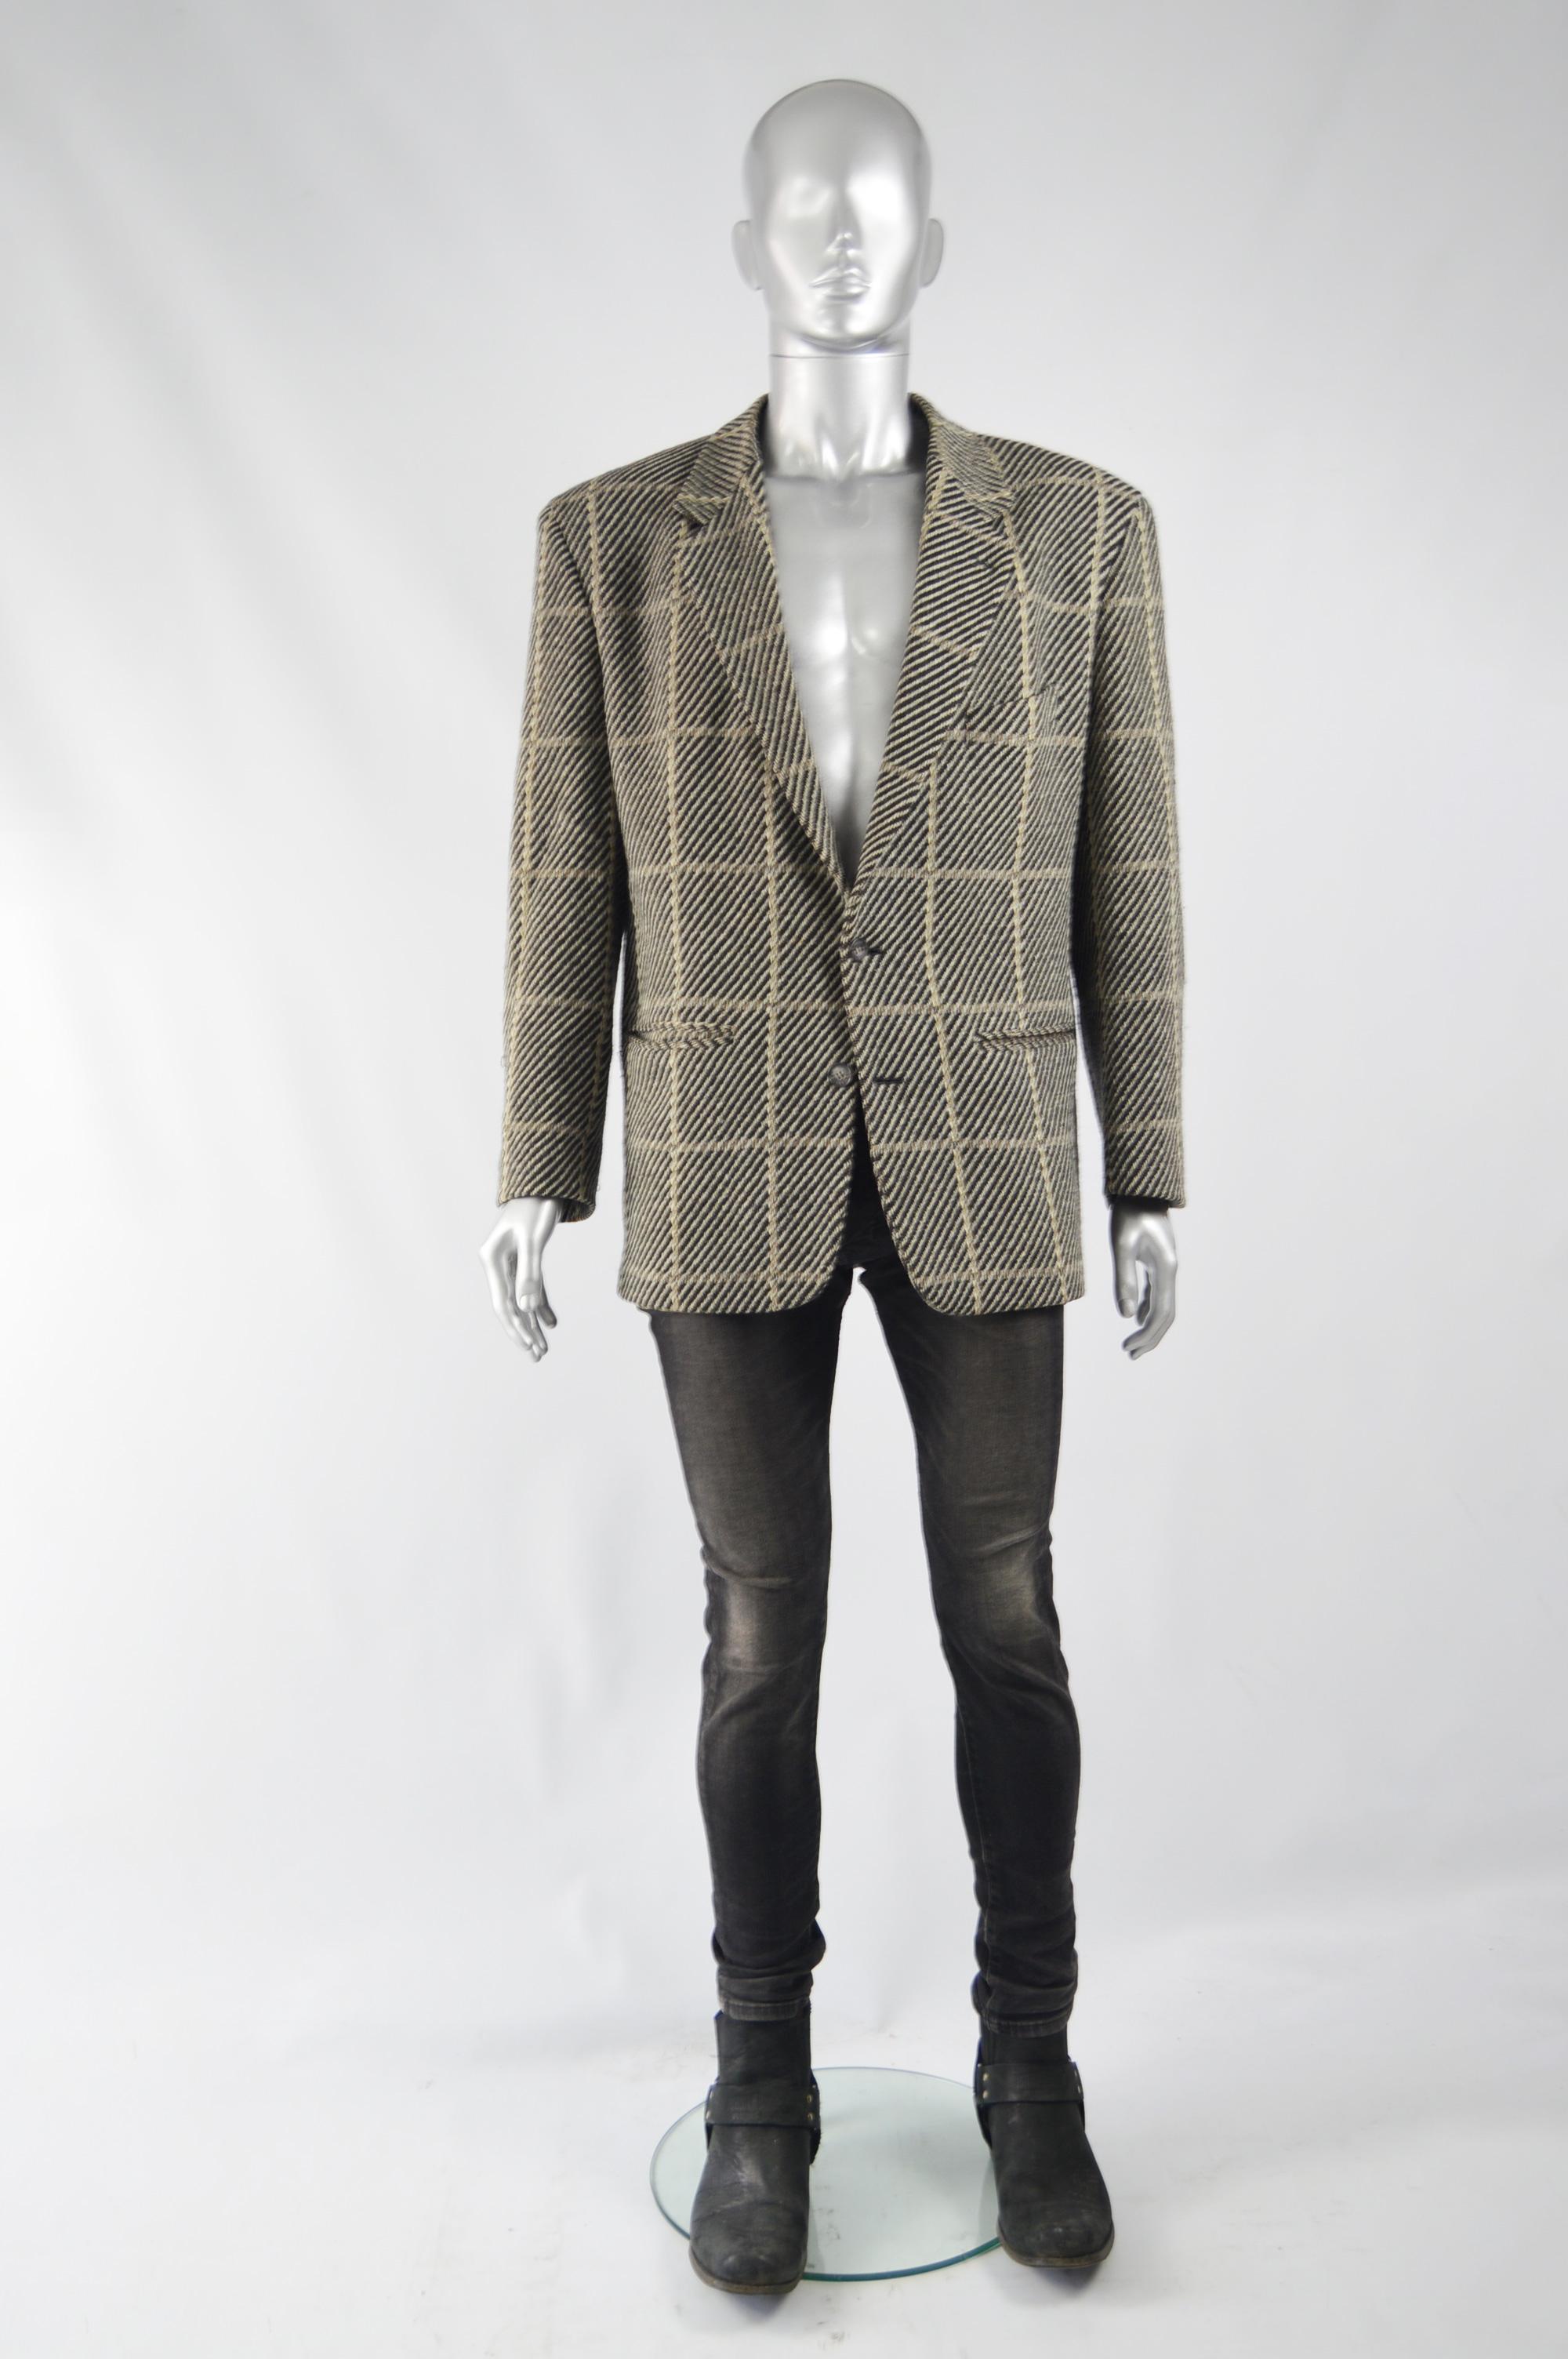 An excellent vintage blazer / sport coat from the 80s by Armani for his Emporio Armani line. In a checked wool fabric with bold shoulders and a single breasted button fastening and a plaid pattern lining. 

Size: Marked IT 54R which equates to an